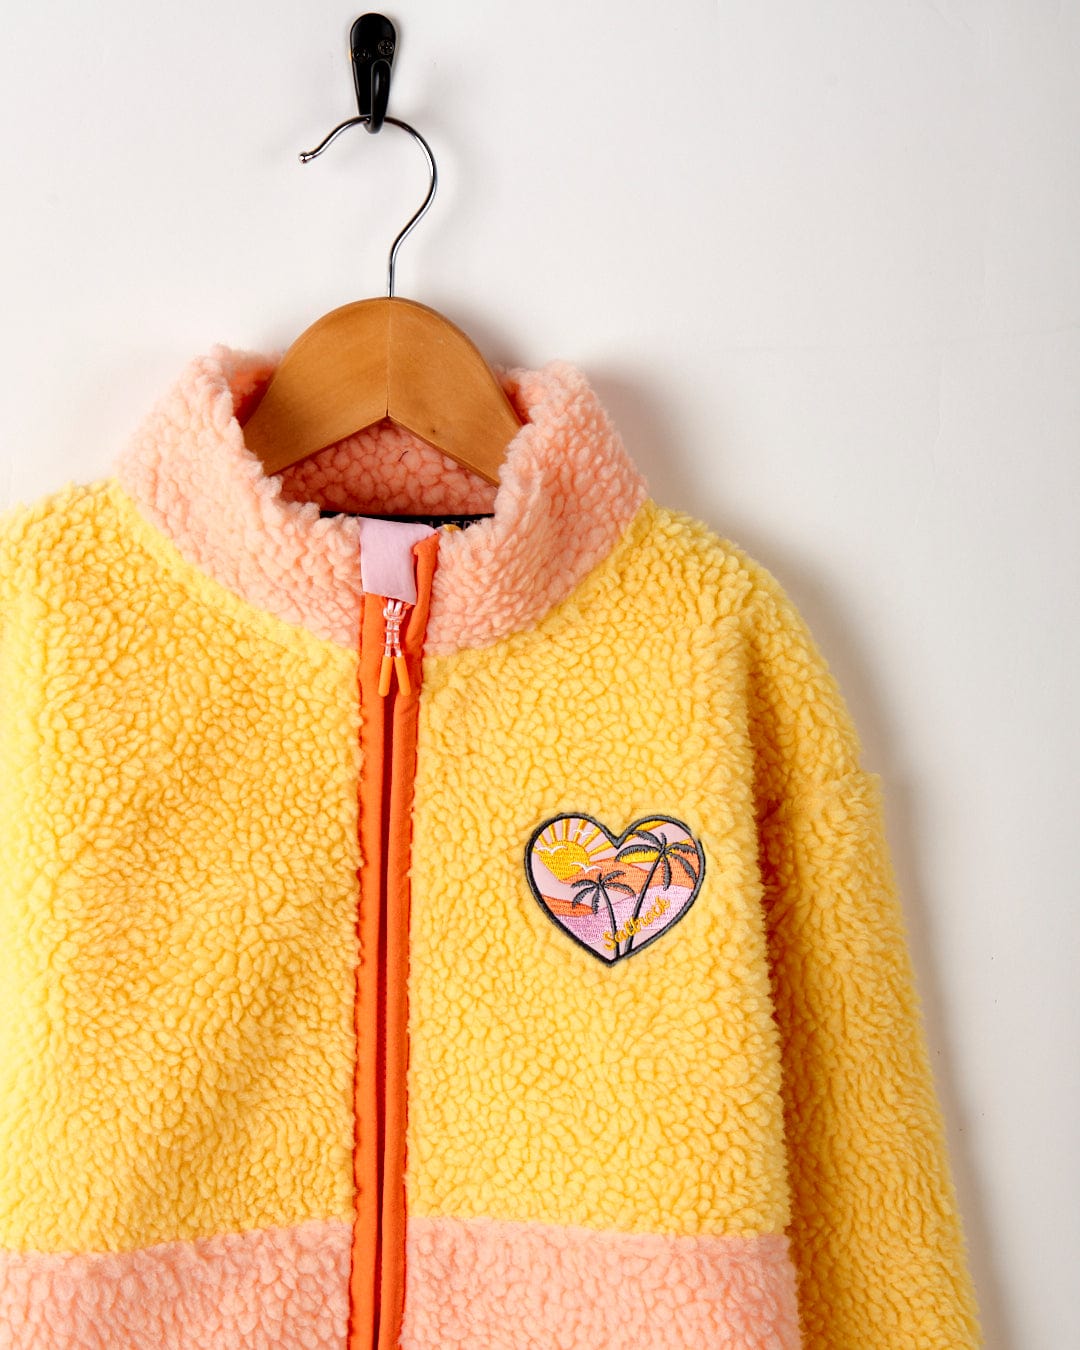 A yellow Emery Sunshine Kids Sherpa Fleece jacket with an embroidered heart graphic by Saltrock.